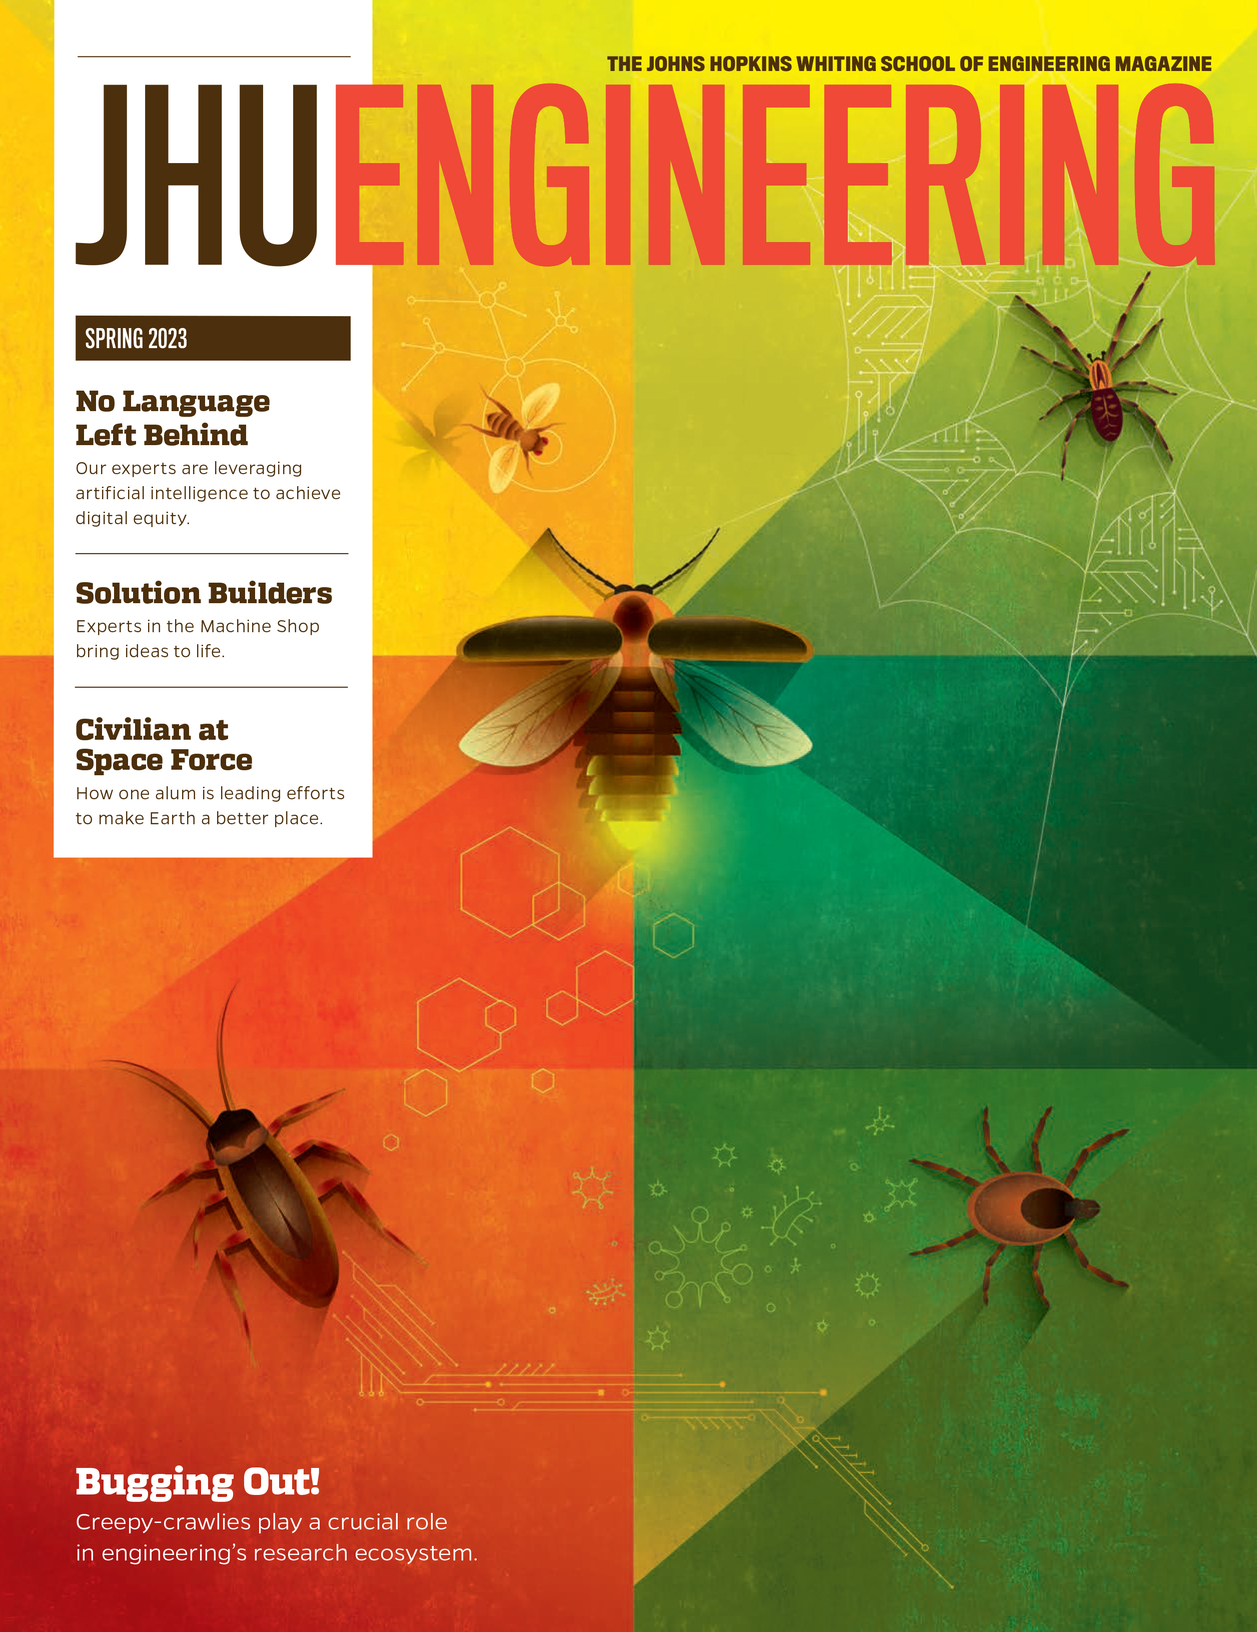 Image of the cover of the magazine showing bug illustrations